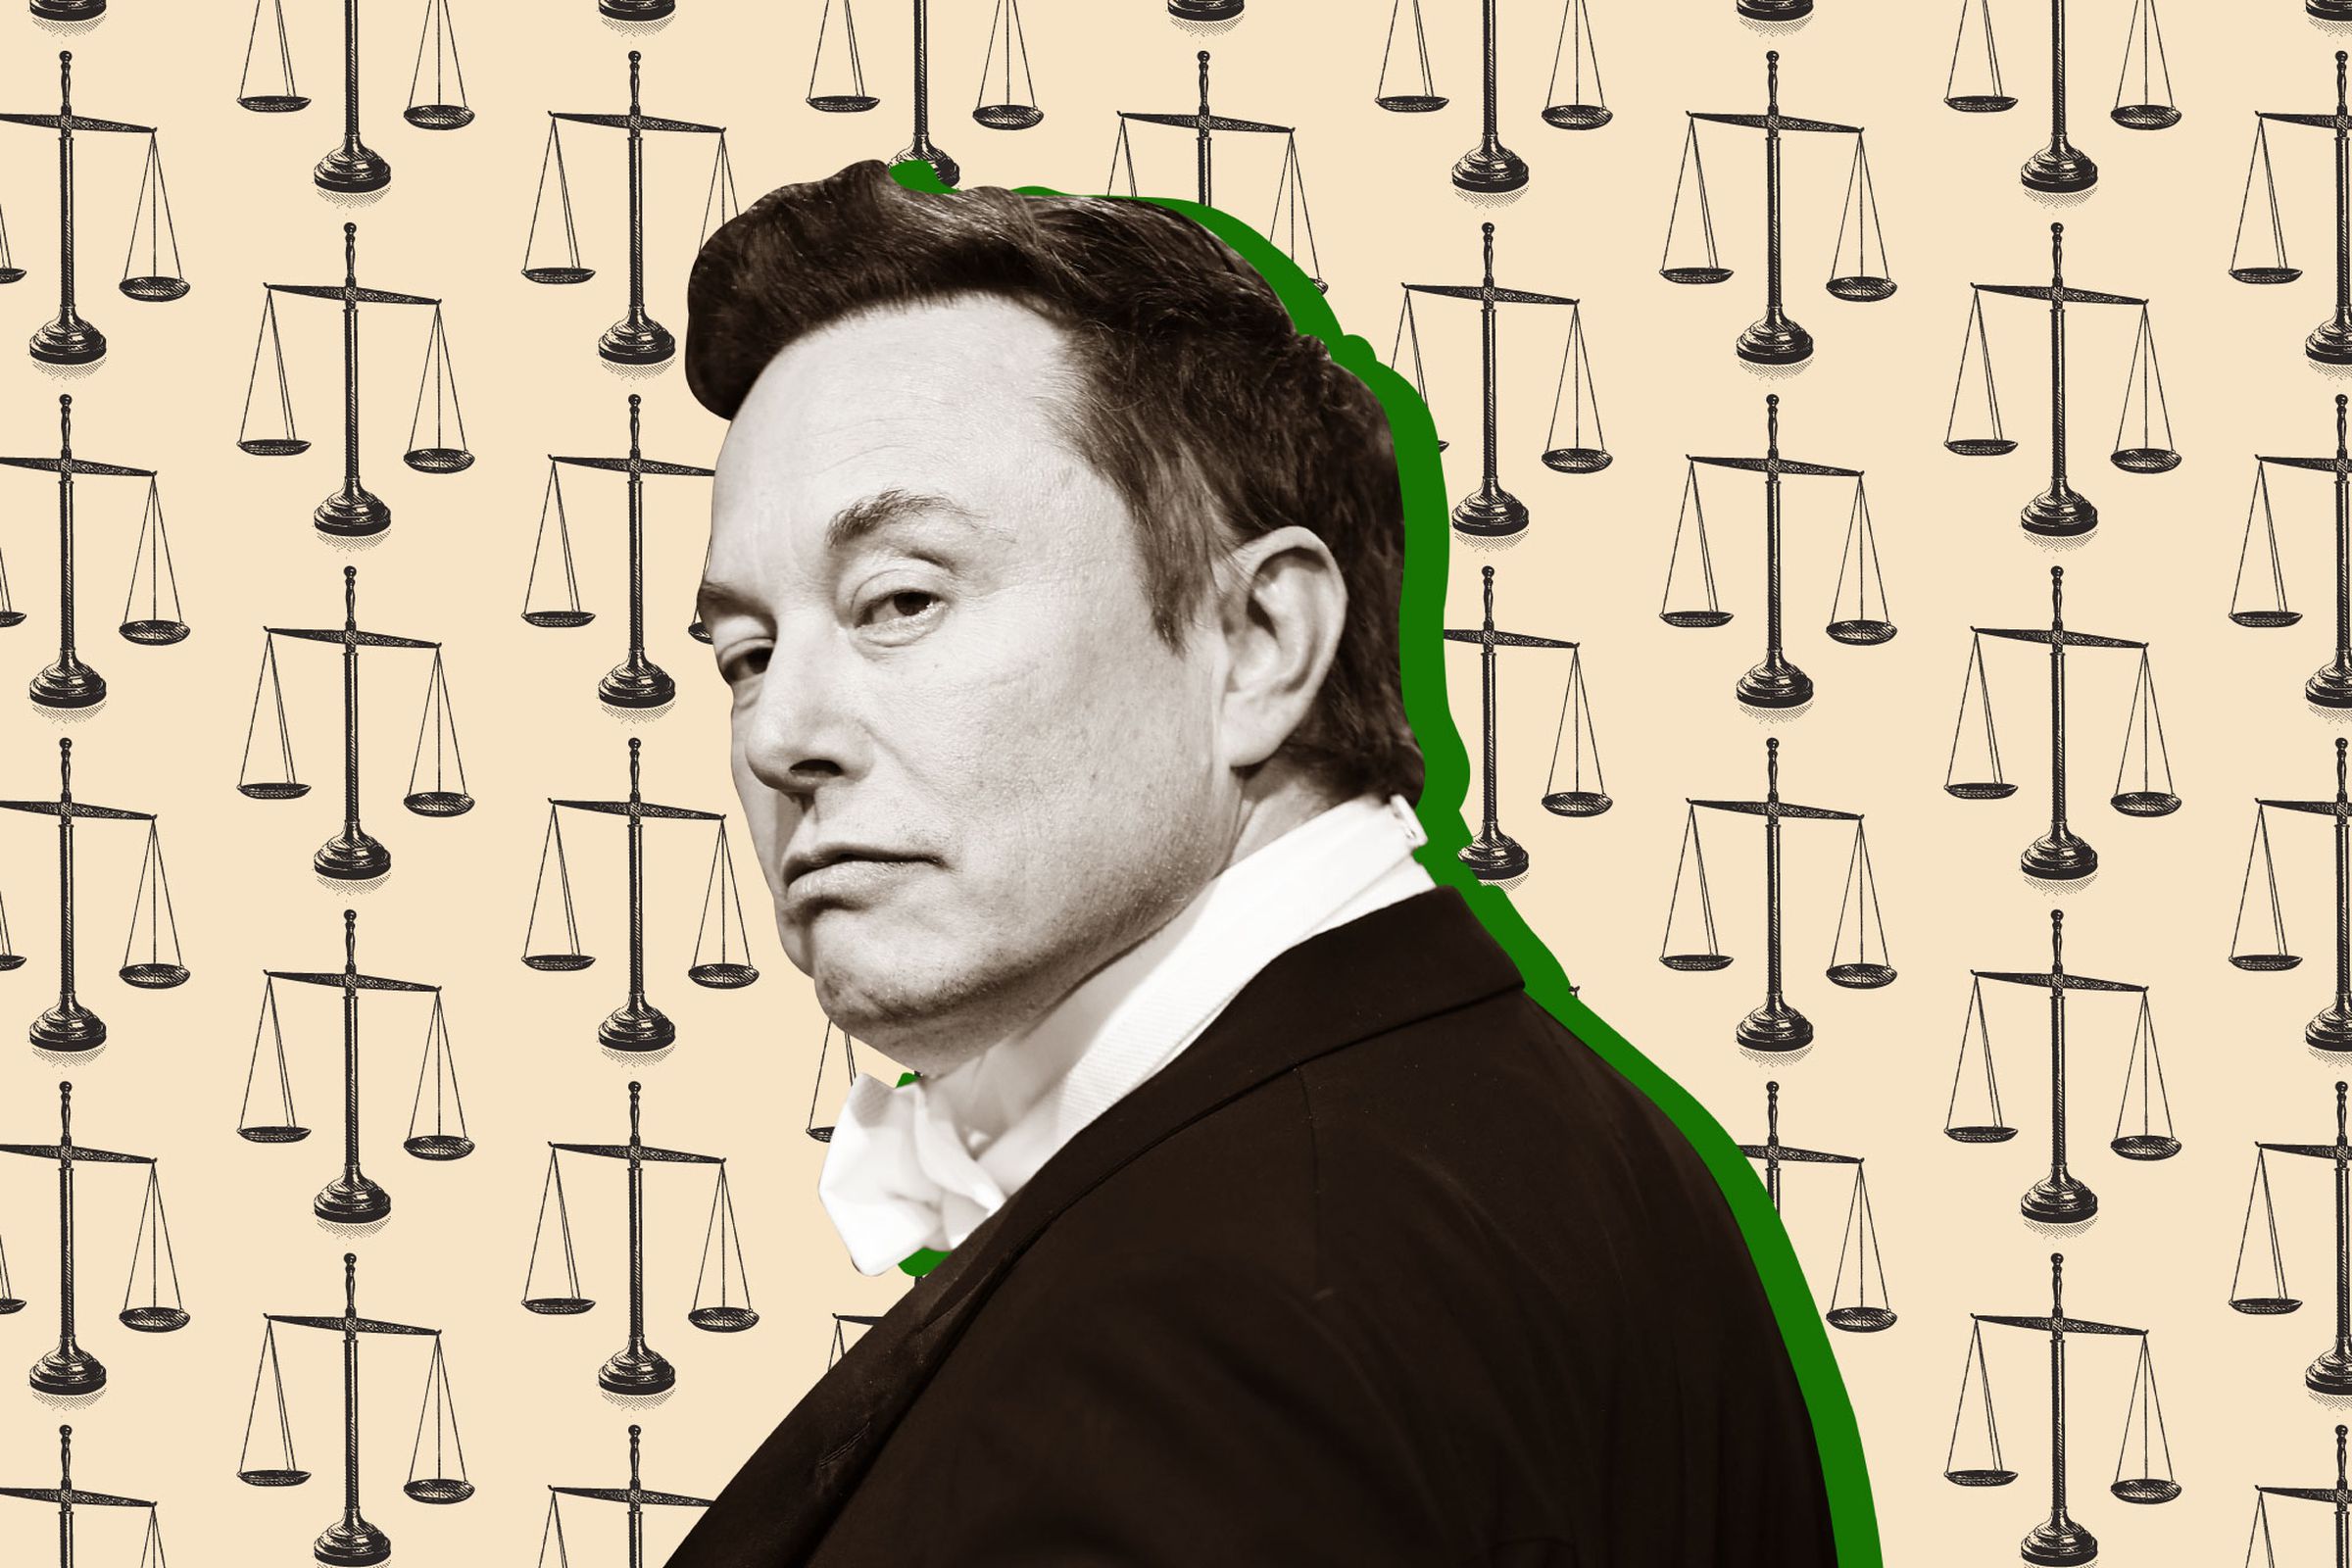 An image of Elon Musk in front of trial scales.